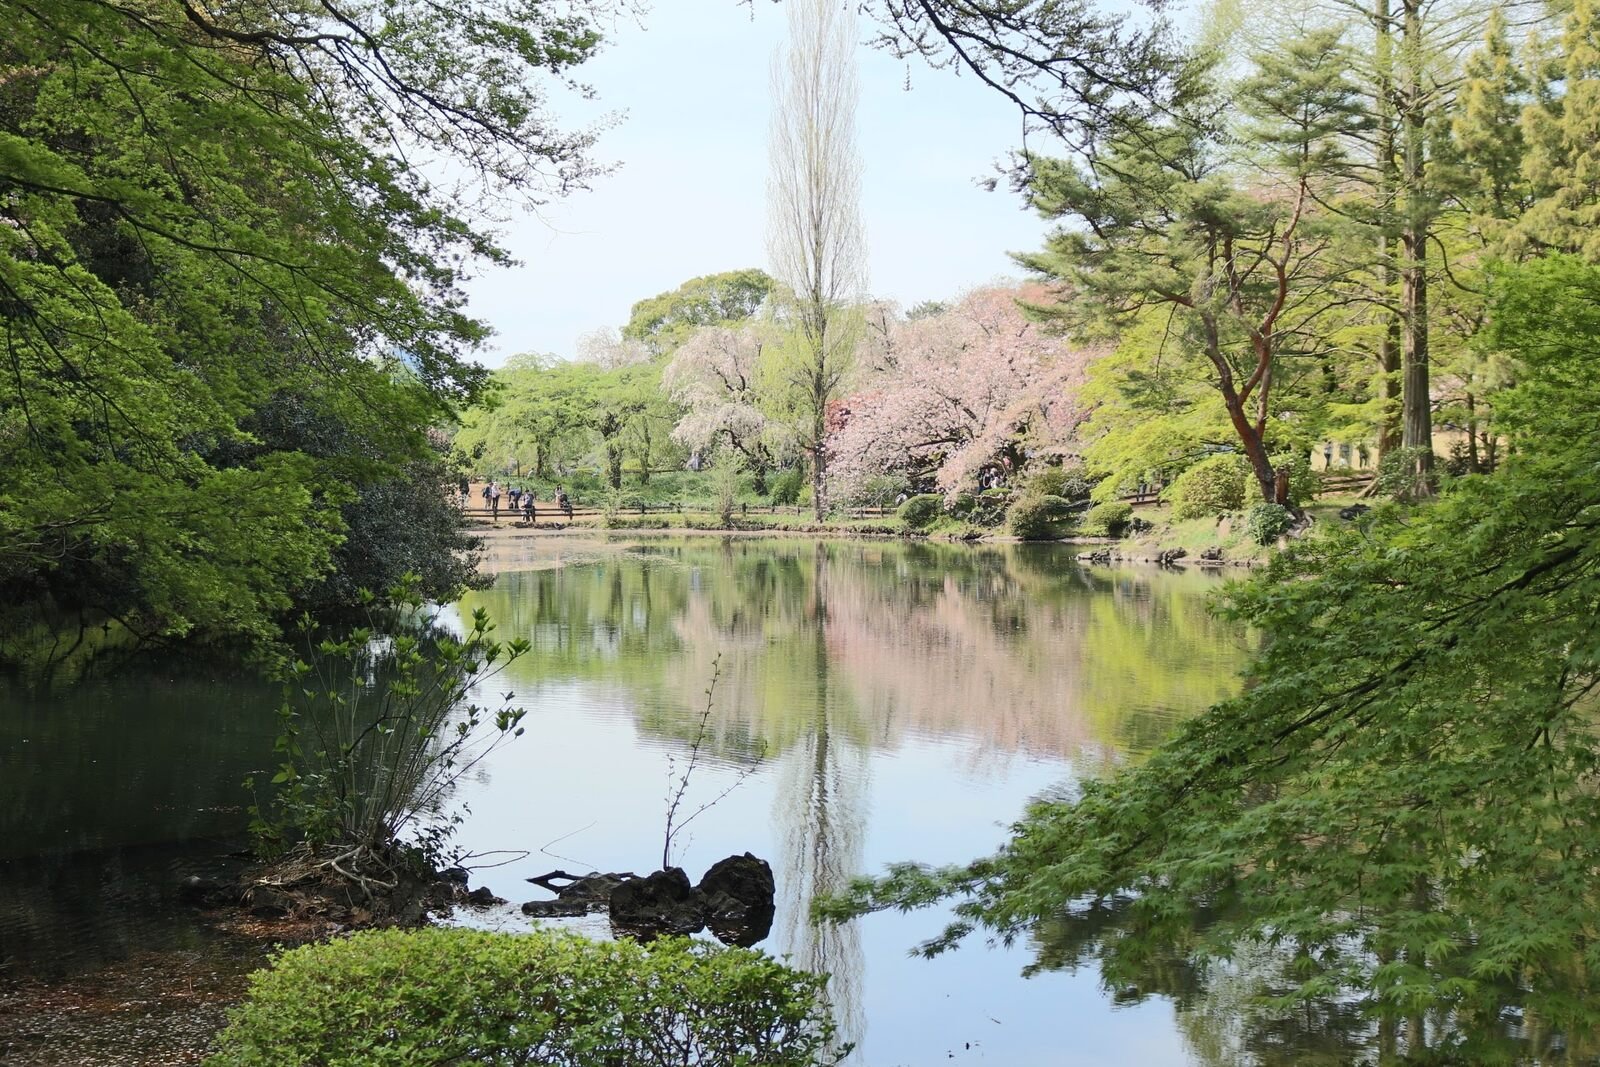 a lake surrounded by lush greenery and cherry blossom trees